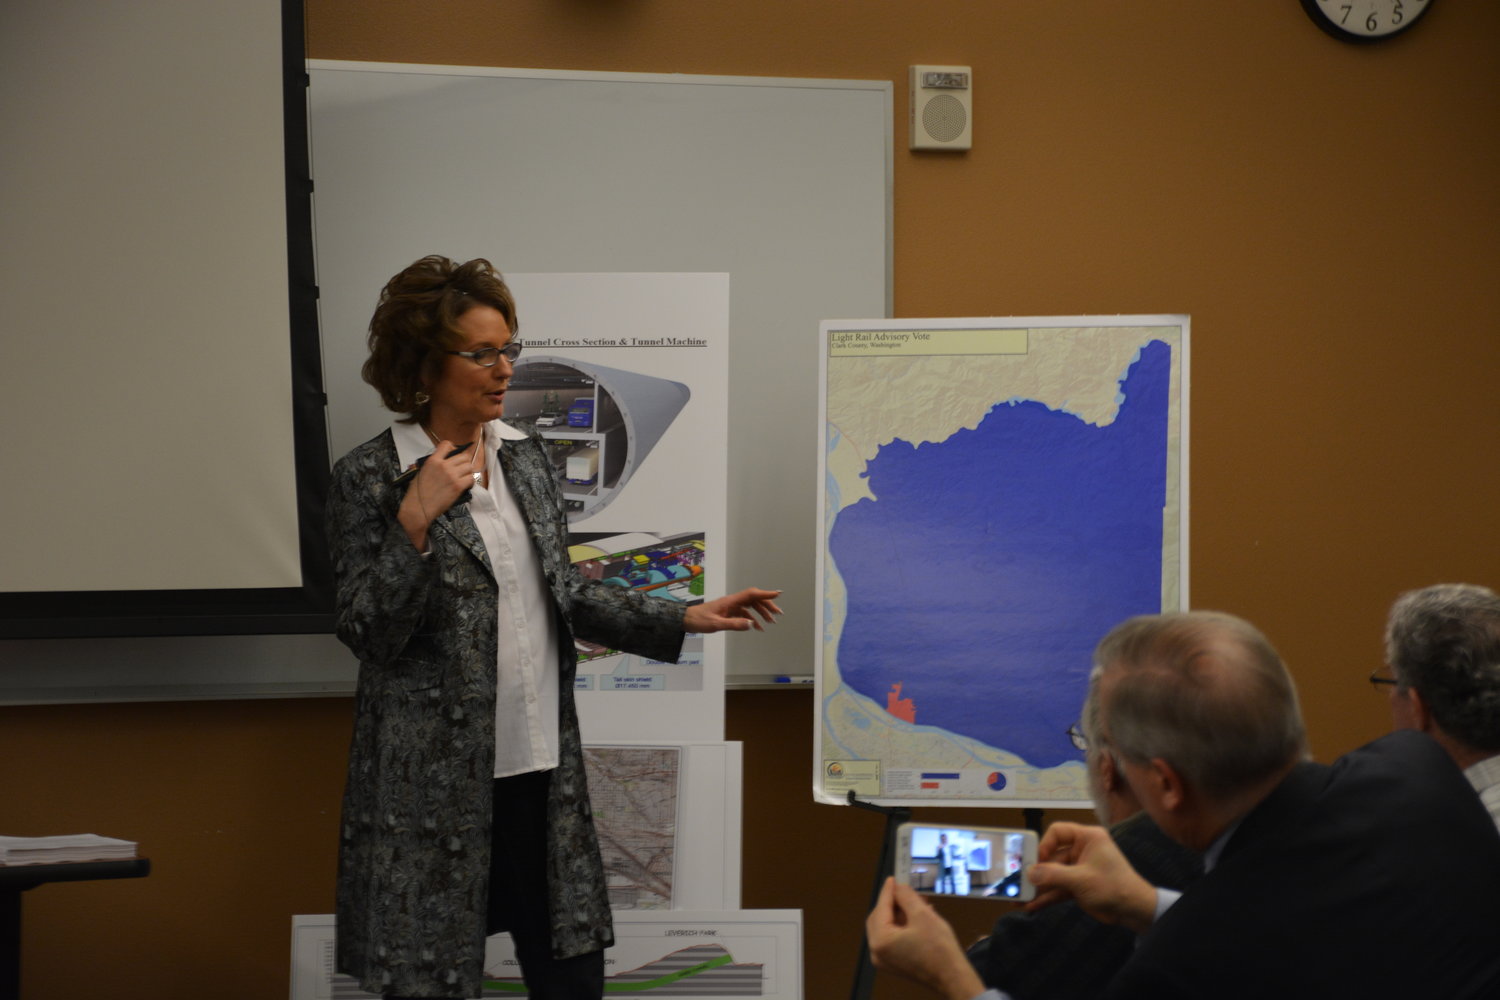 Washington state Rep. Liz Pike, R-Camas, points at a visual showing voting on a light rail (dark area meaning voting against light rail) during a “Transportation Solutions” town hall on Feb. 11.